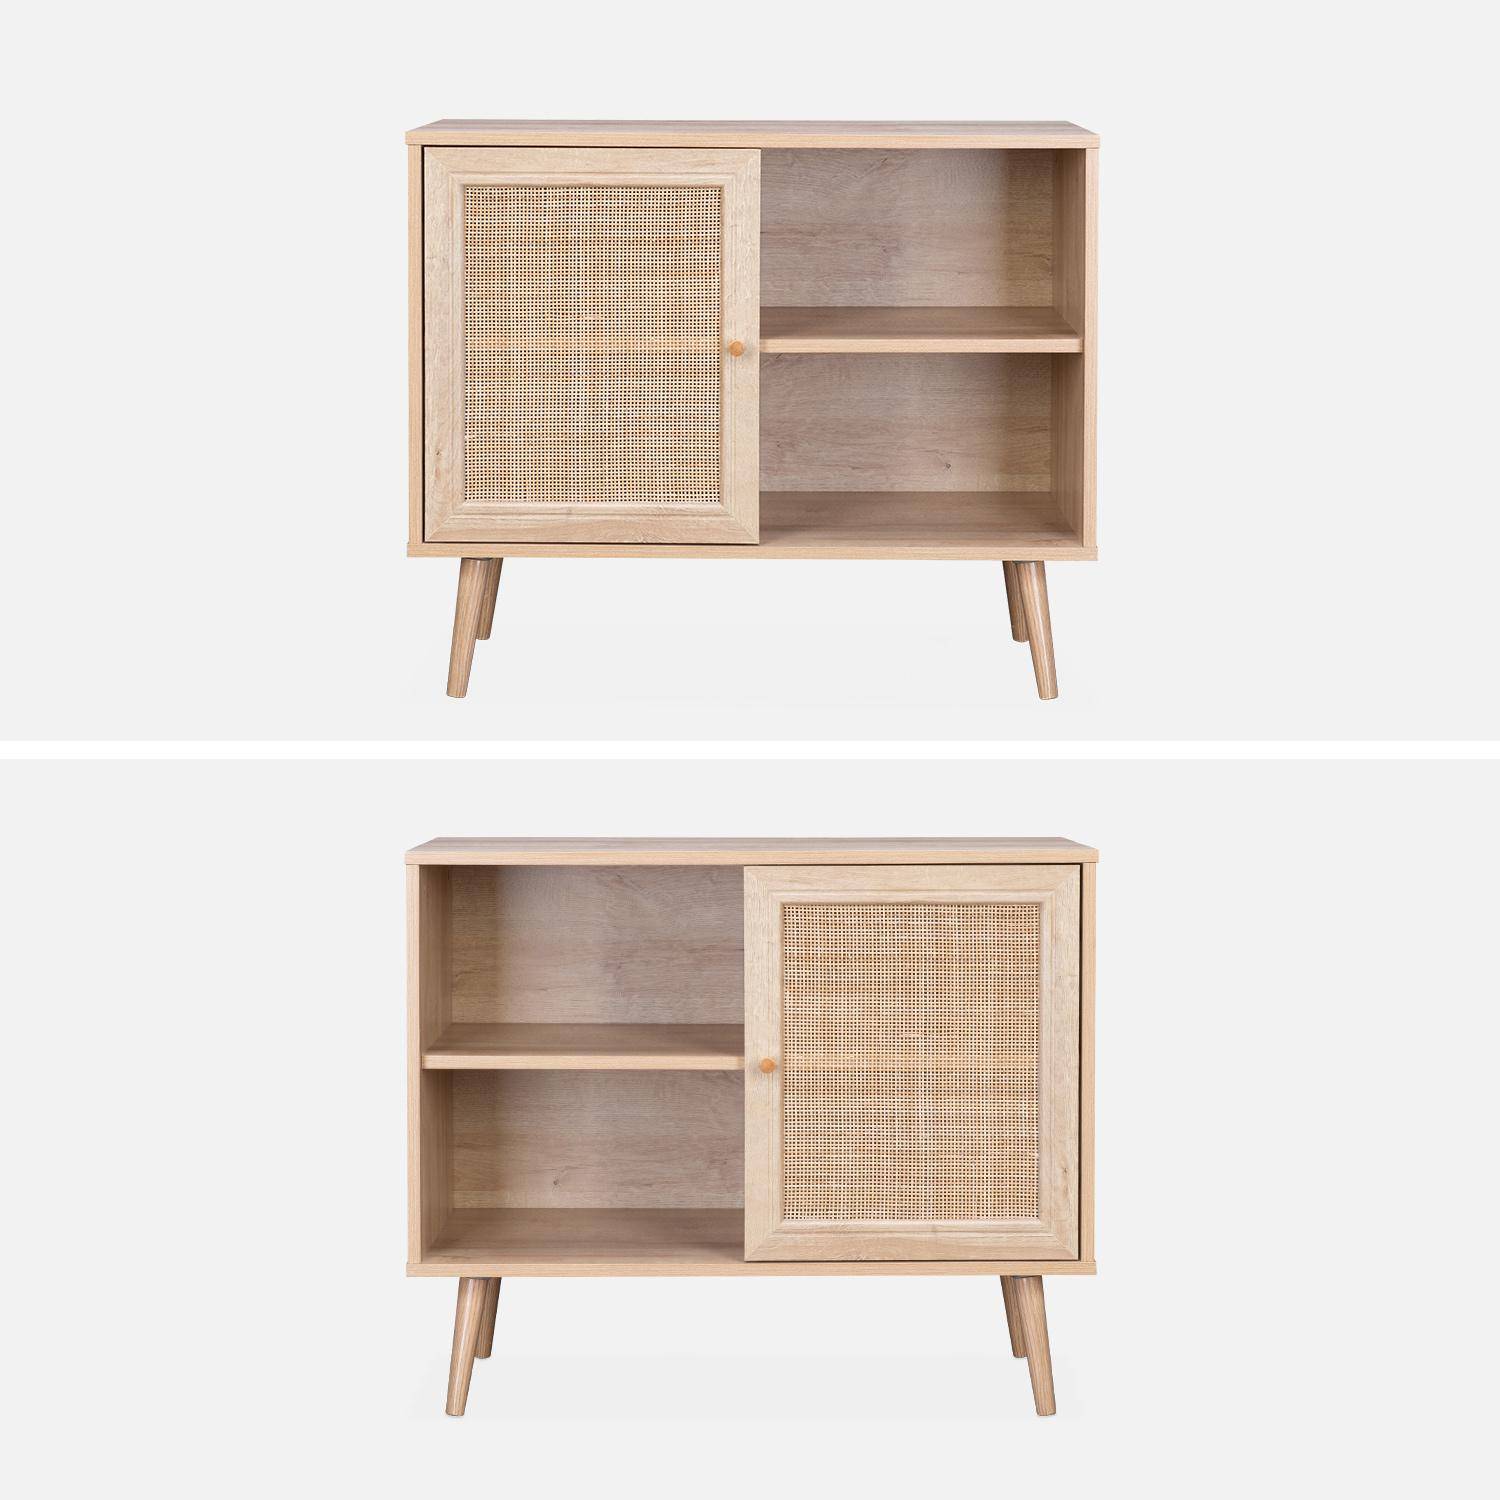 Wooden and cane rattan detail storage cabinet with 2 shelves, 1 cupboard, Scandi-style legs, 80x39x65.8cm - Boheme - Natural wood colour Photo4